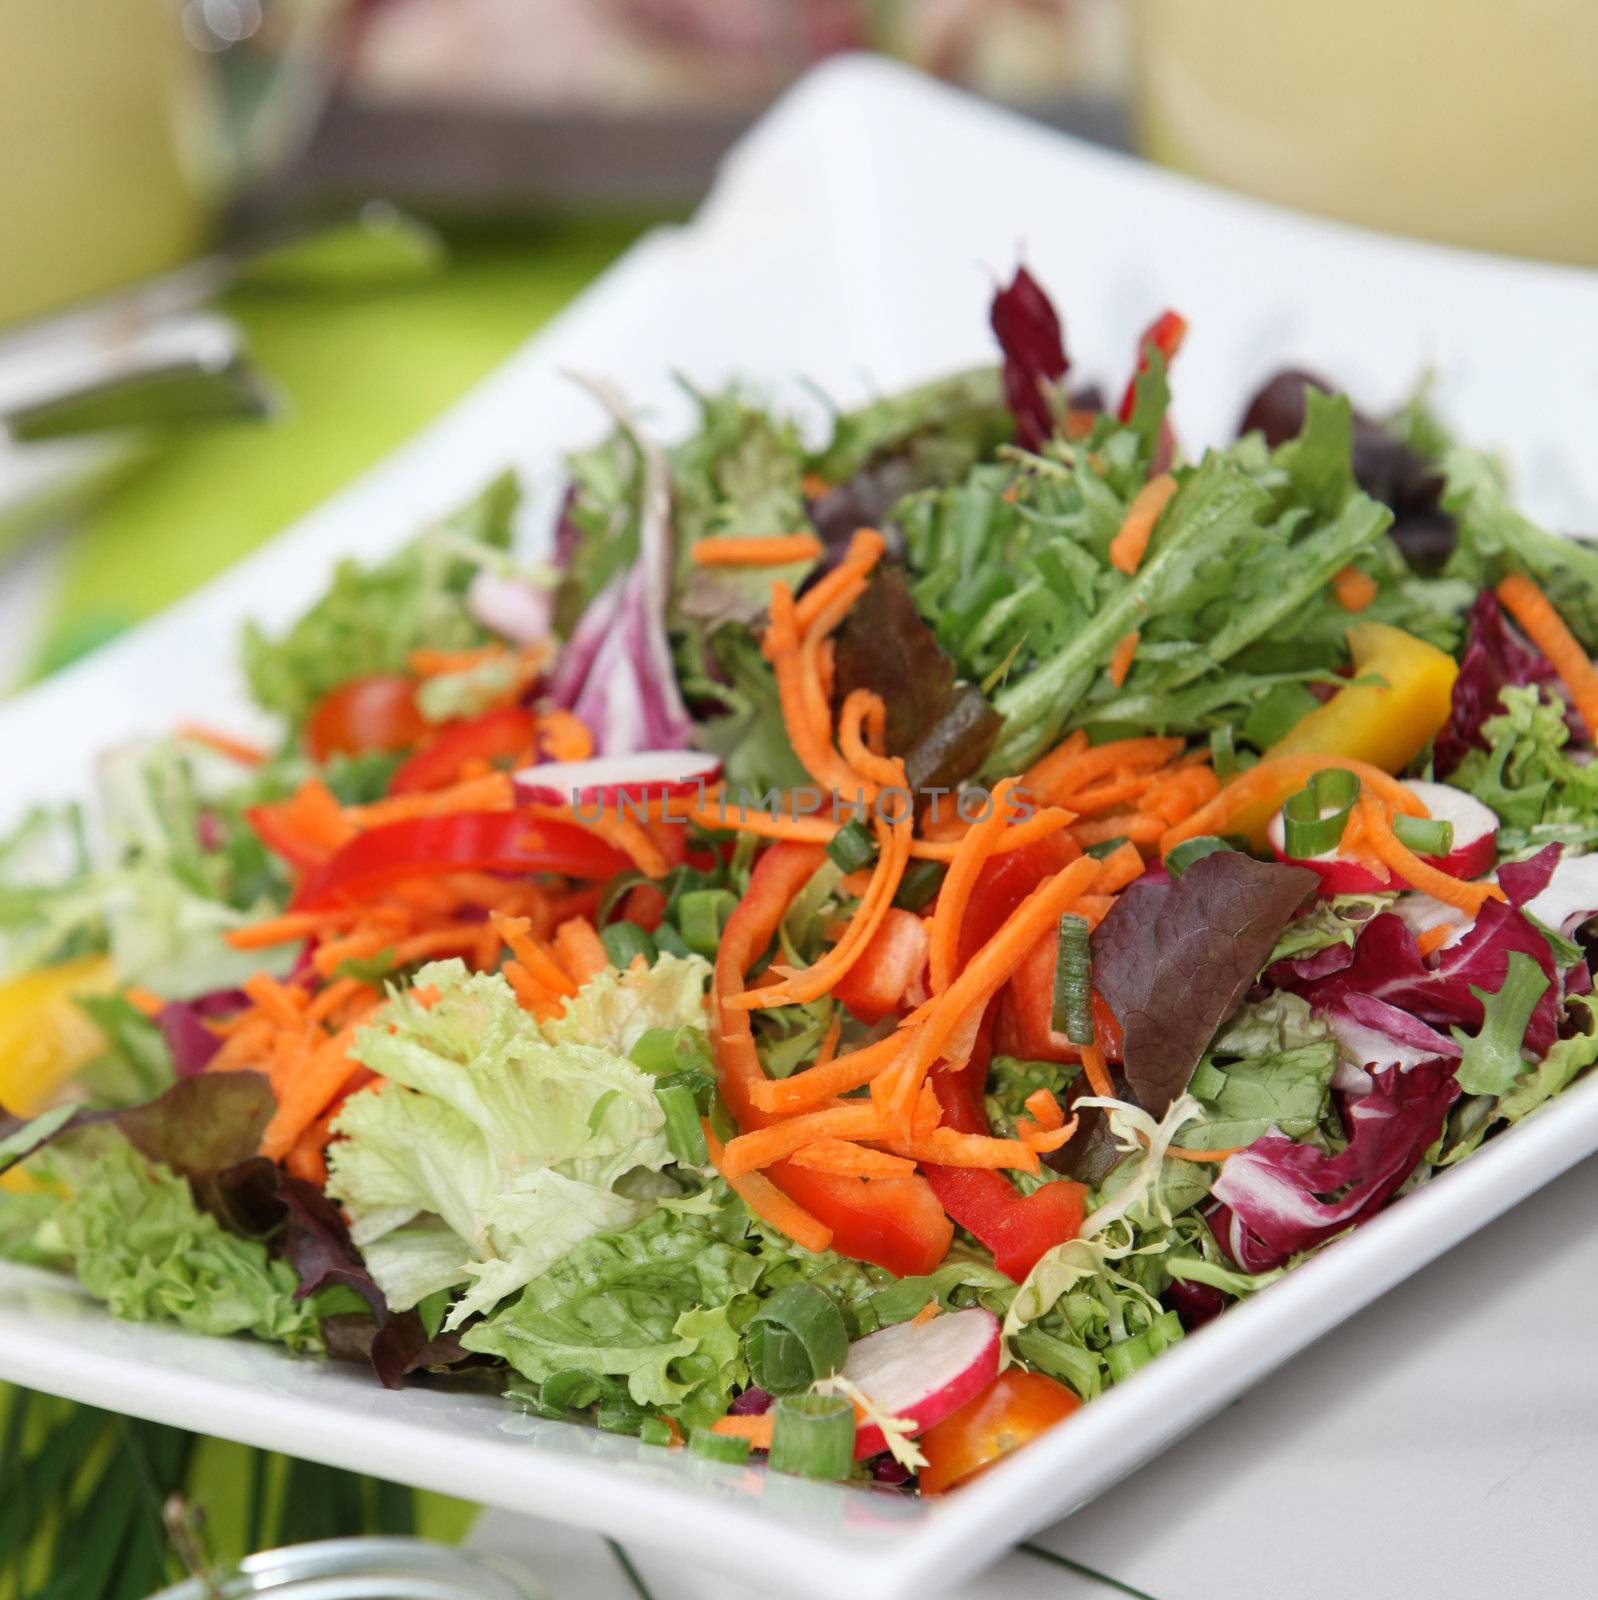 Mixed fresh salad with peppers, lettuce, tomatoes and carrot by Farina6000